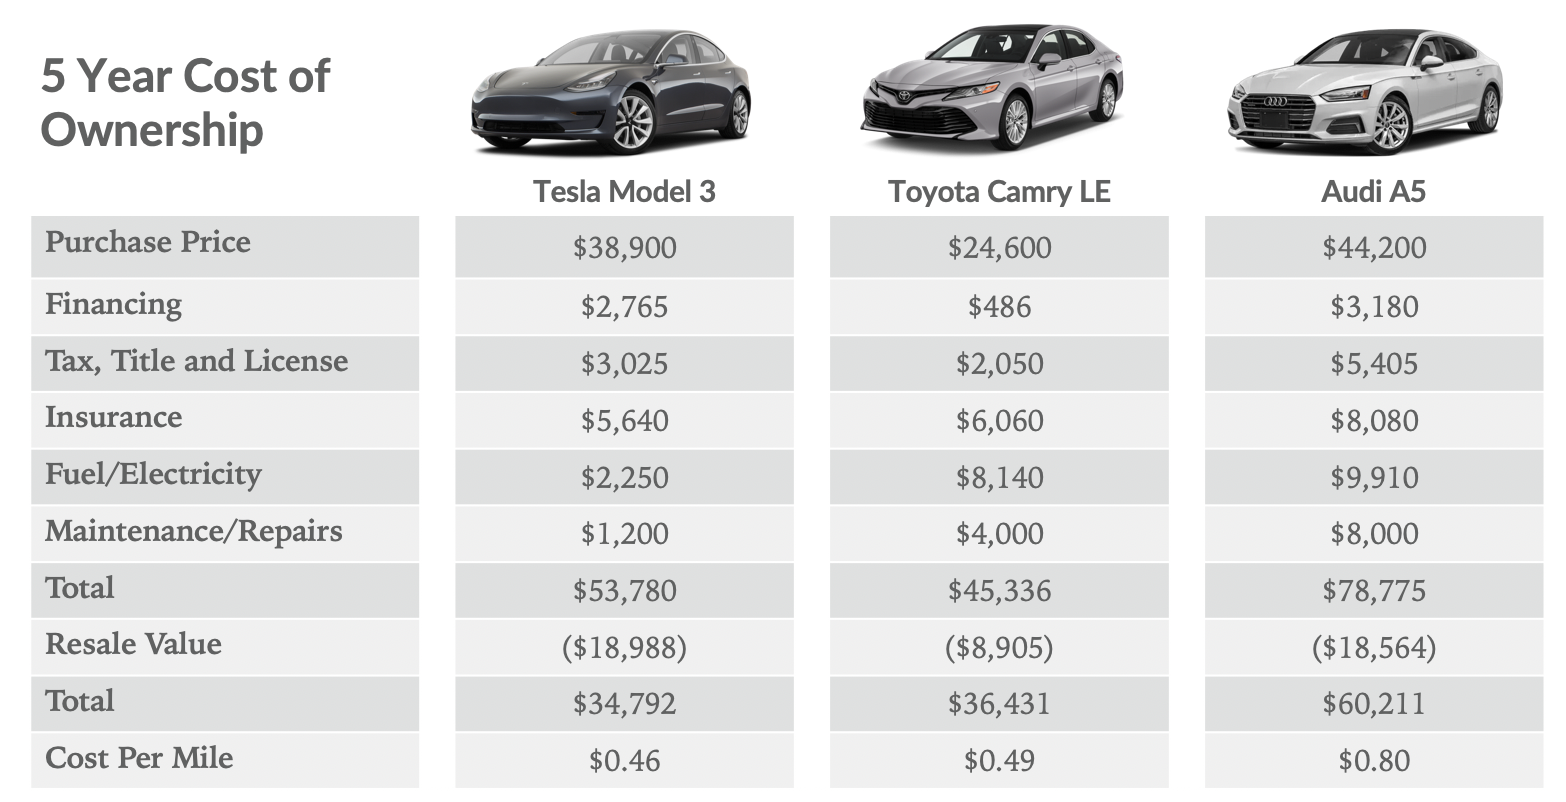 Tesla Model 3 Cost of Ownership Slightly Cheaper Than a Camry | Loup Ventures1566 x 802